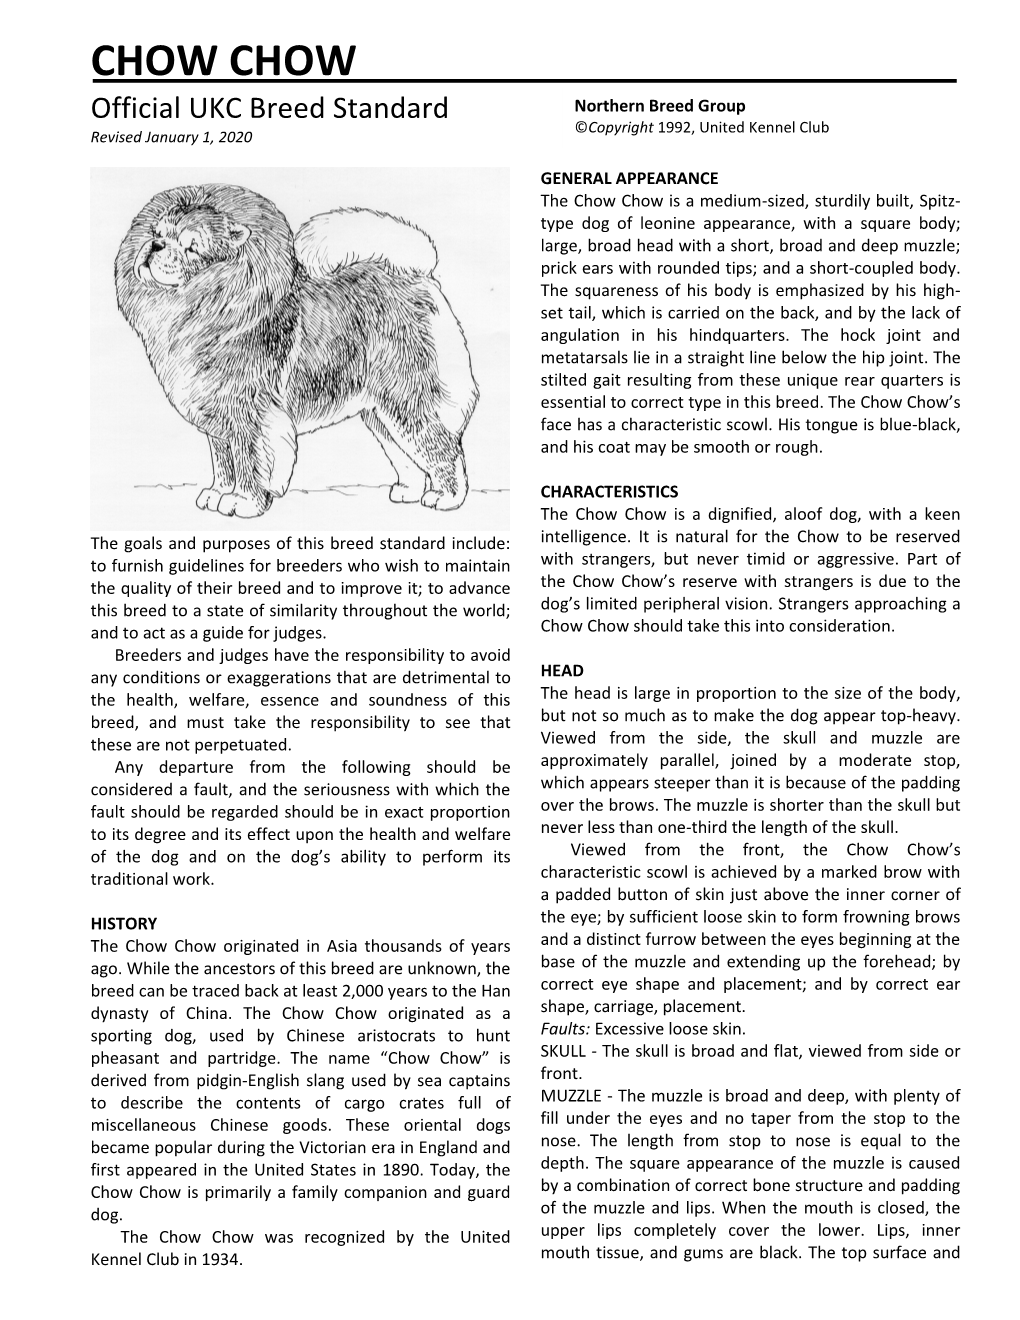 CHOW CHOW Official UKC Breed Standard Northern Breed Group ©Copyright 1992, United Kennel Club Revised January 1, 2020